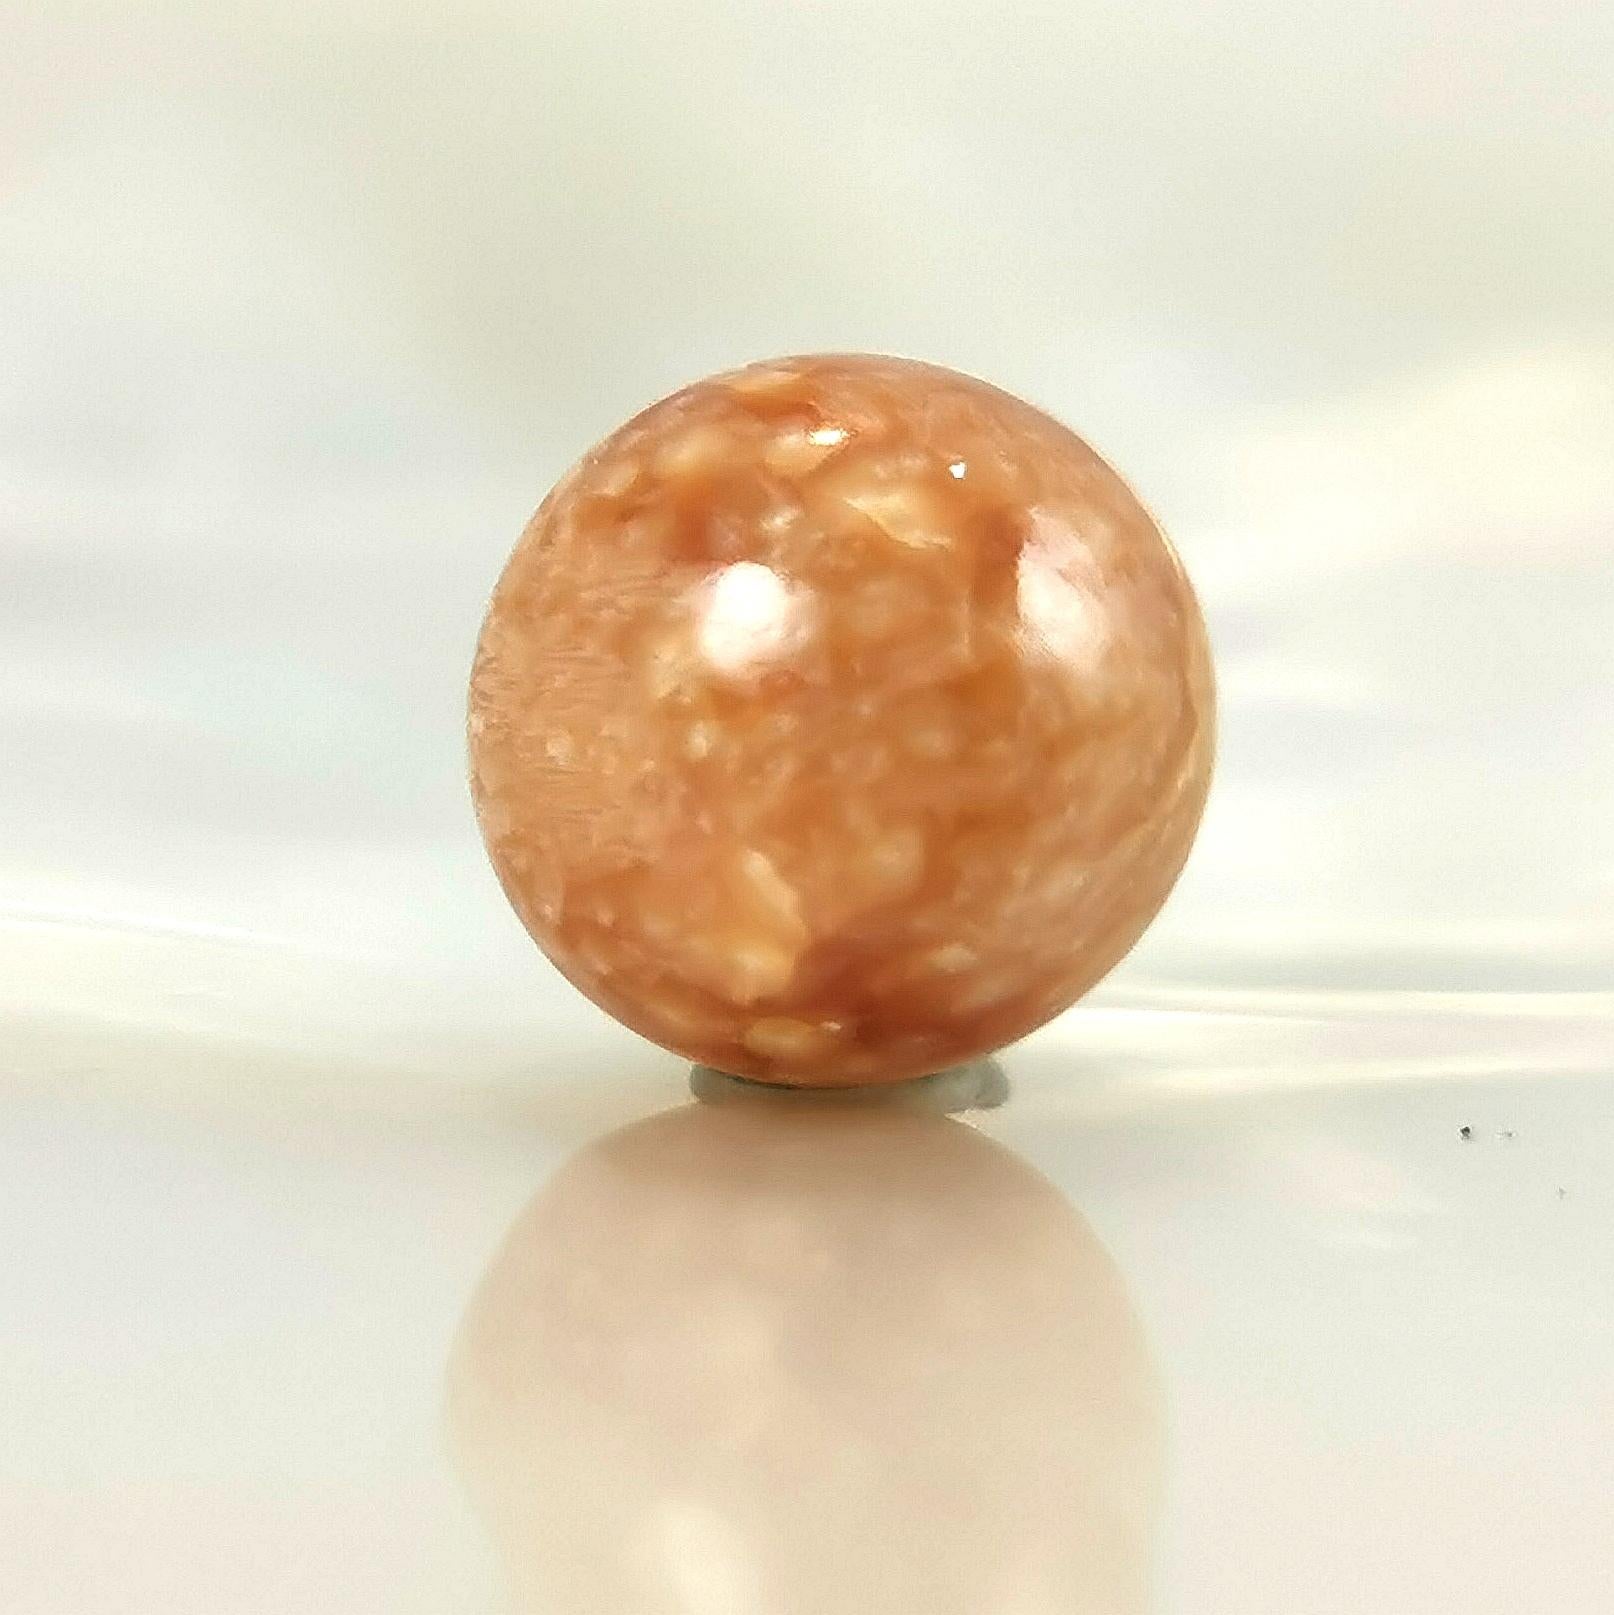 Beautiful and rare round shape natural pearl Melo with fantastic flame patterns (iridescent).
This magnificent pearl was found in a sea snail MeloMelo which habitat area is from South East Asia.
That natural pearl growth 1mm each year and its size